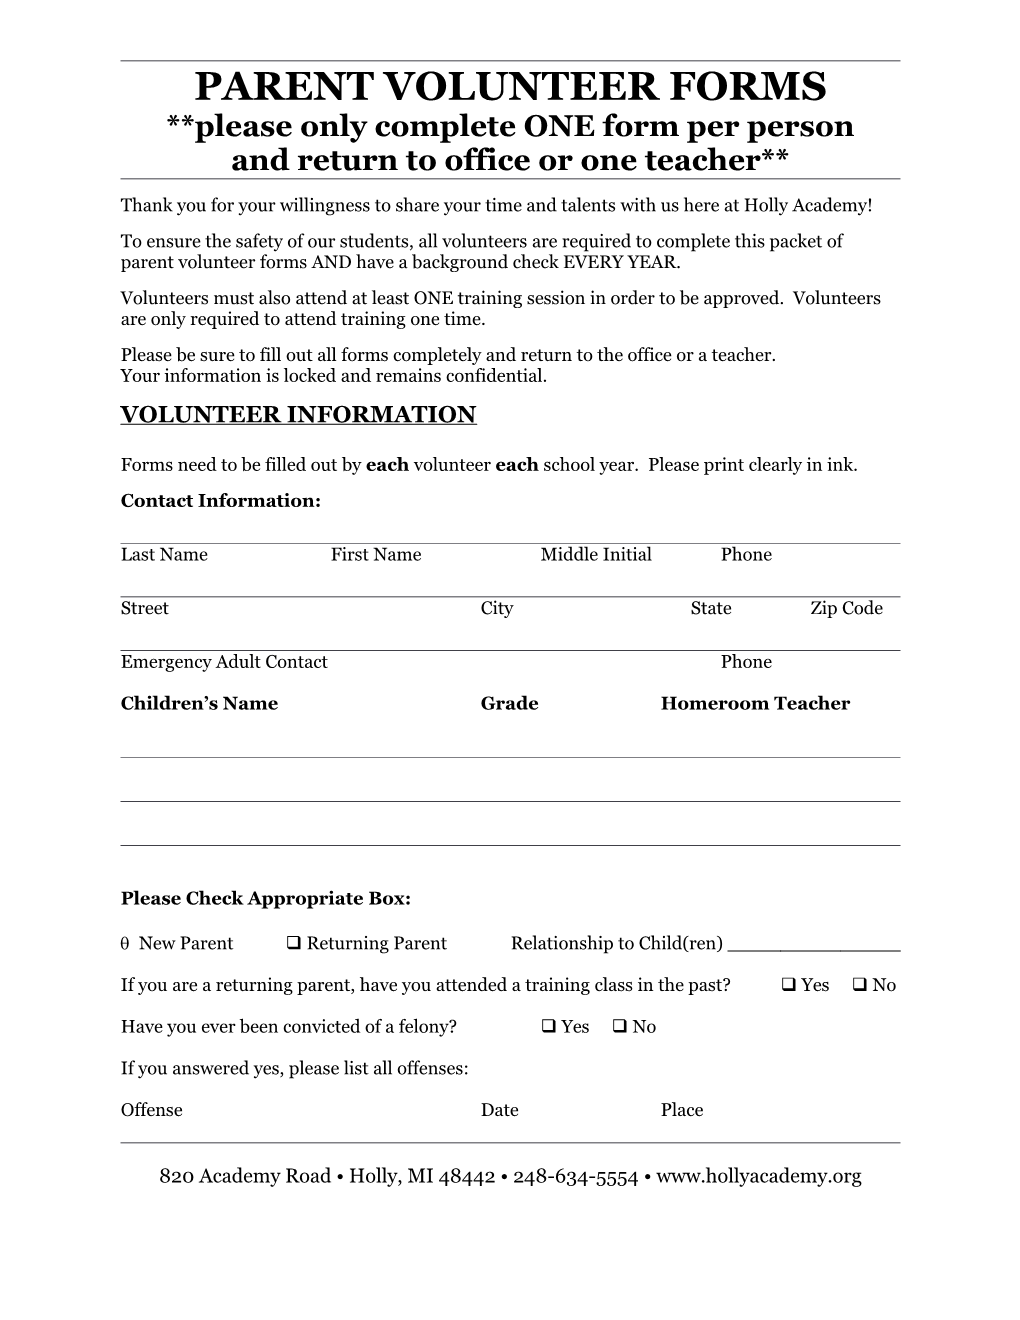 Please Only Complete ONE Form Per Person